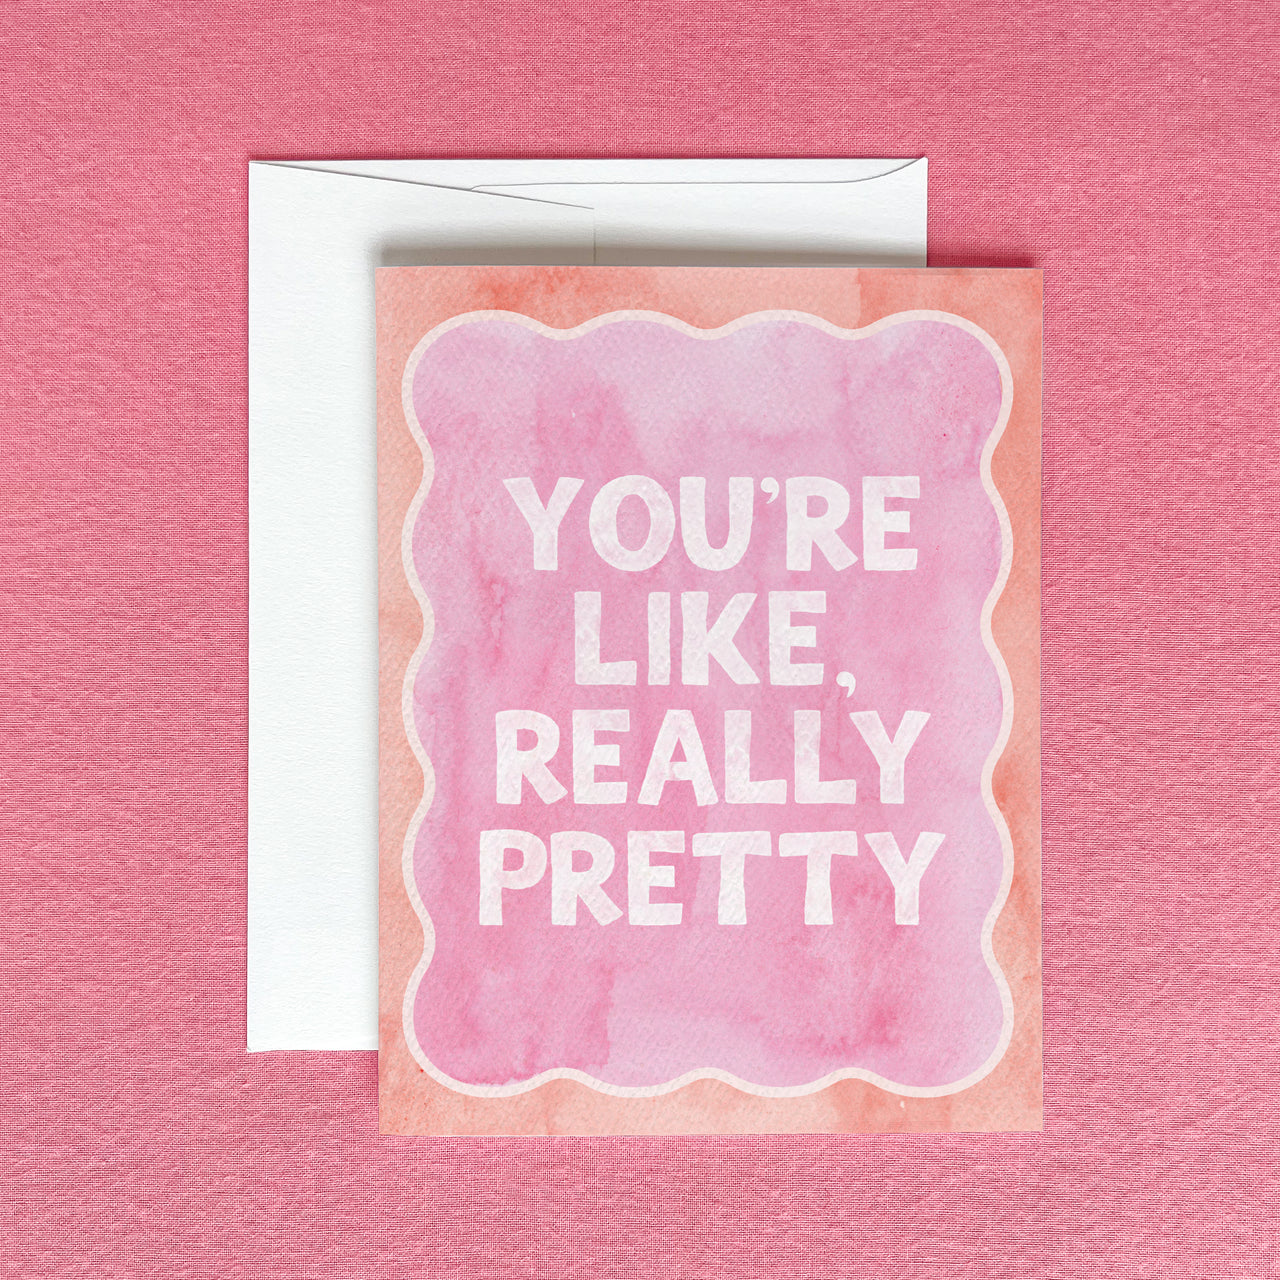 You're Like, Really Pretty Greeting Card by Gert & Co